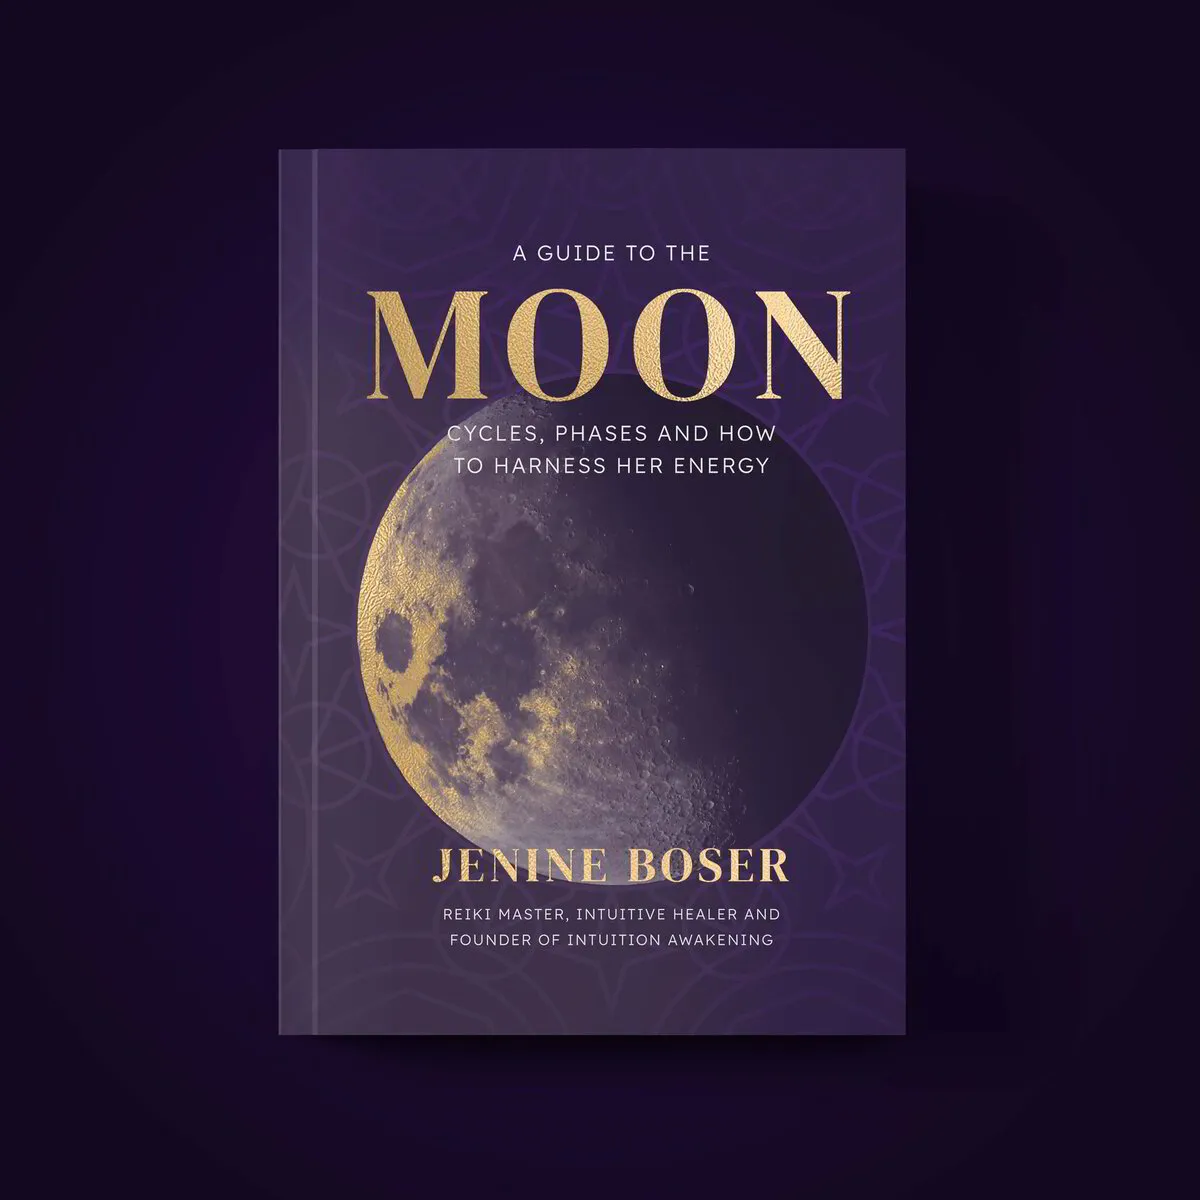 A Guide to The Moon: Cycles, Phases and How to Harness the Energy of the Moon